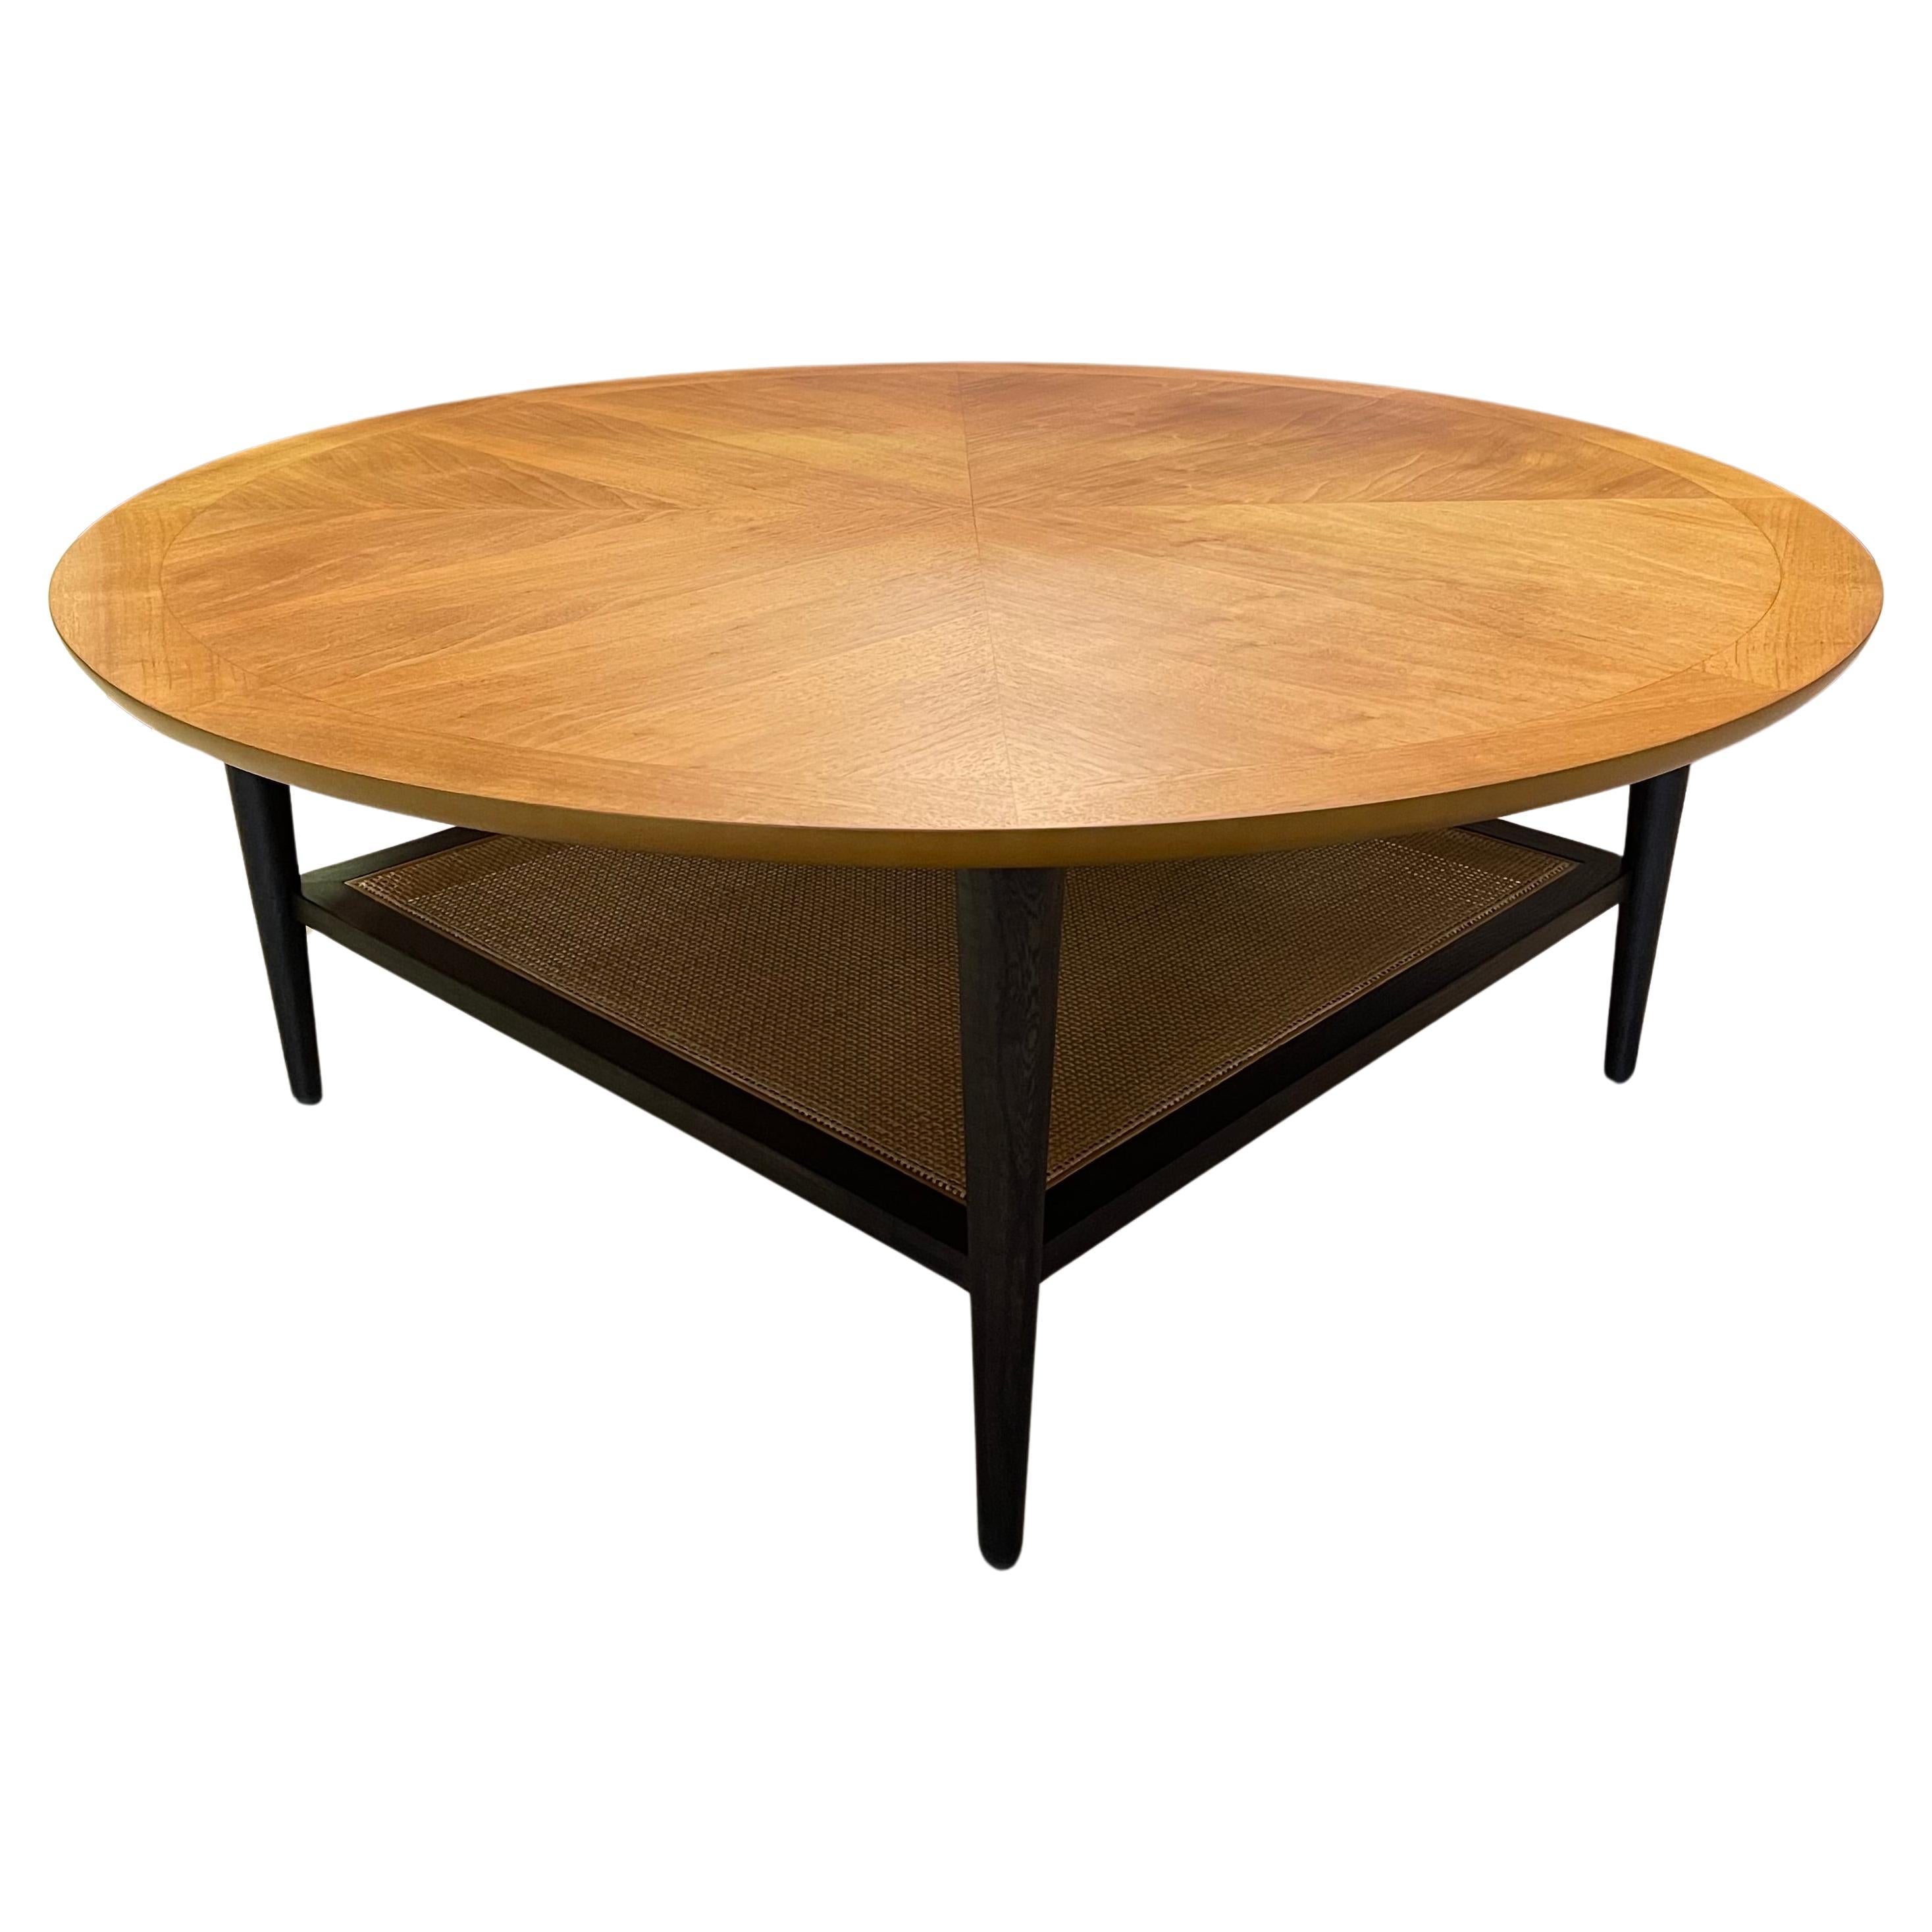 Mid-Century Modern Round Coffee Table By Lane Alta Vista For Sale